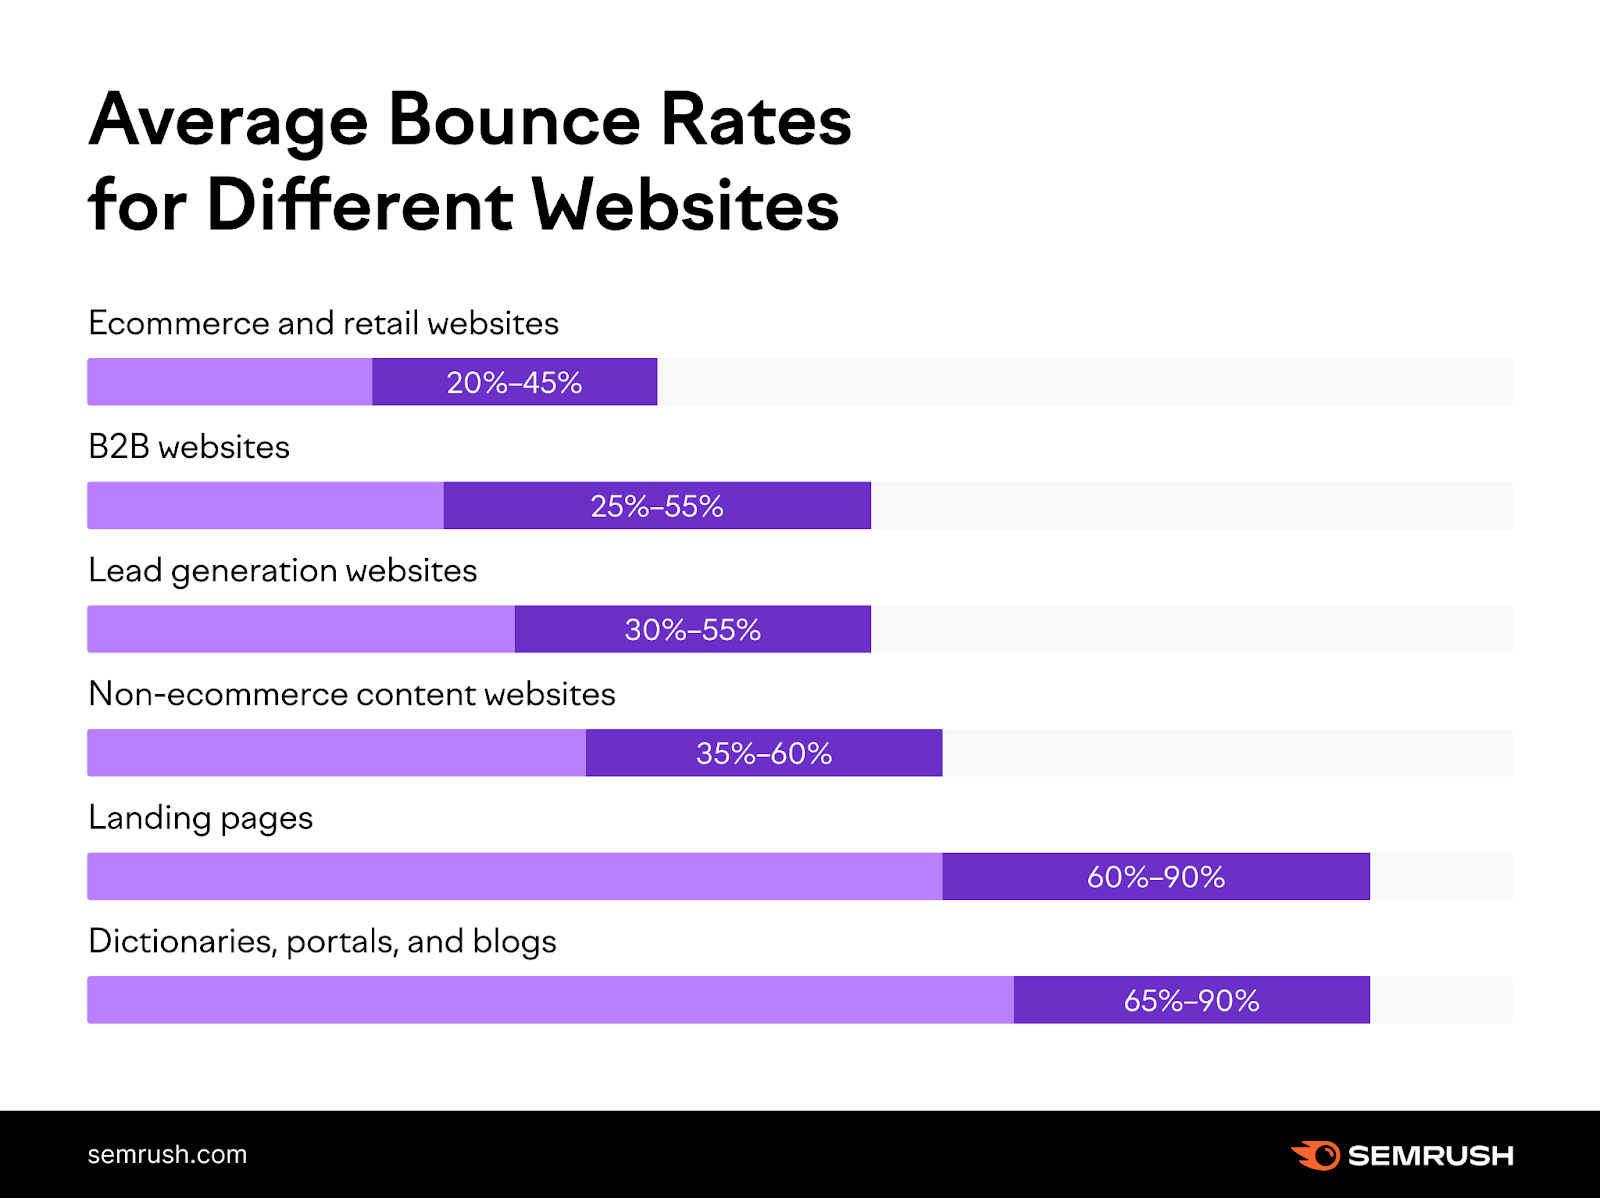 The average bounce rate of web pages changes depending on whether it's for ecommerce, B2B, lead generation, or another topic